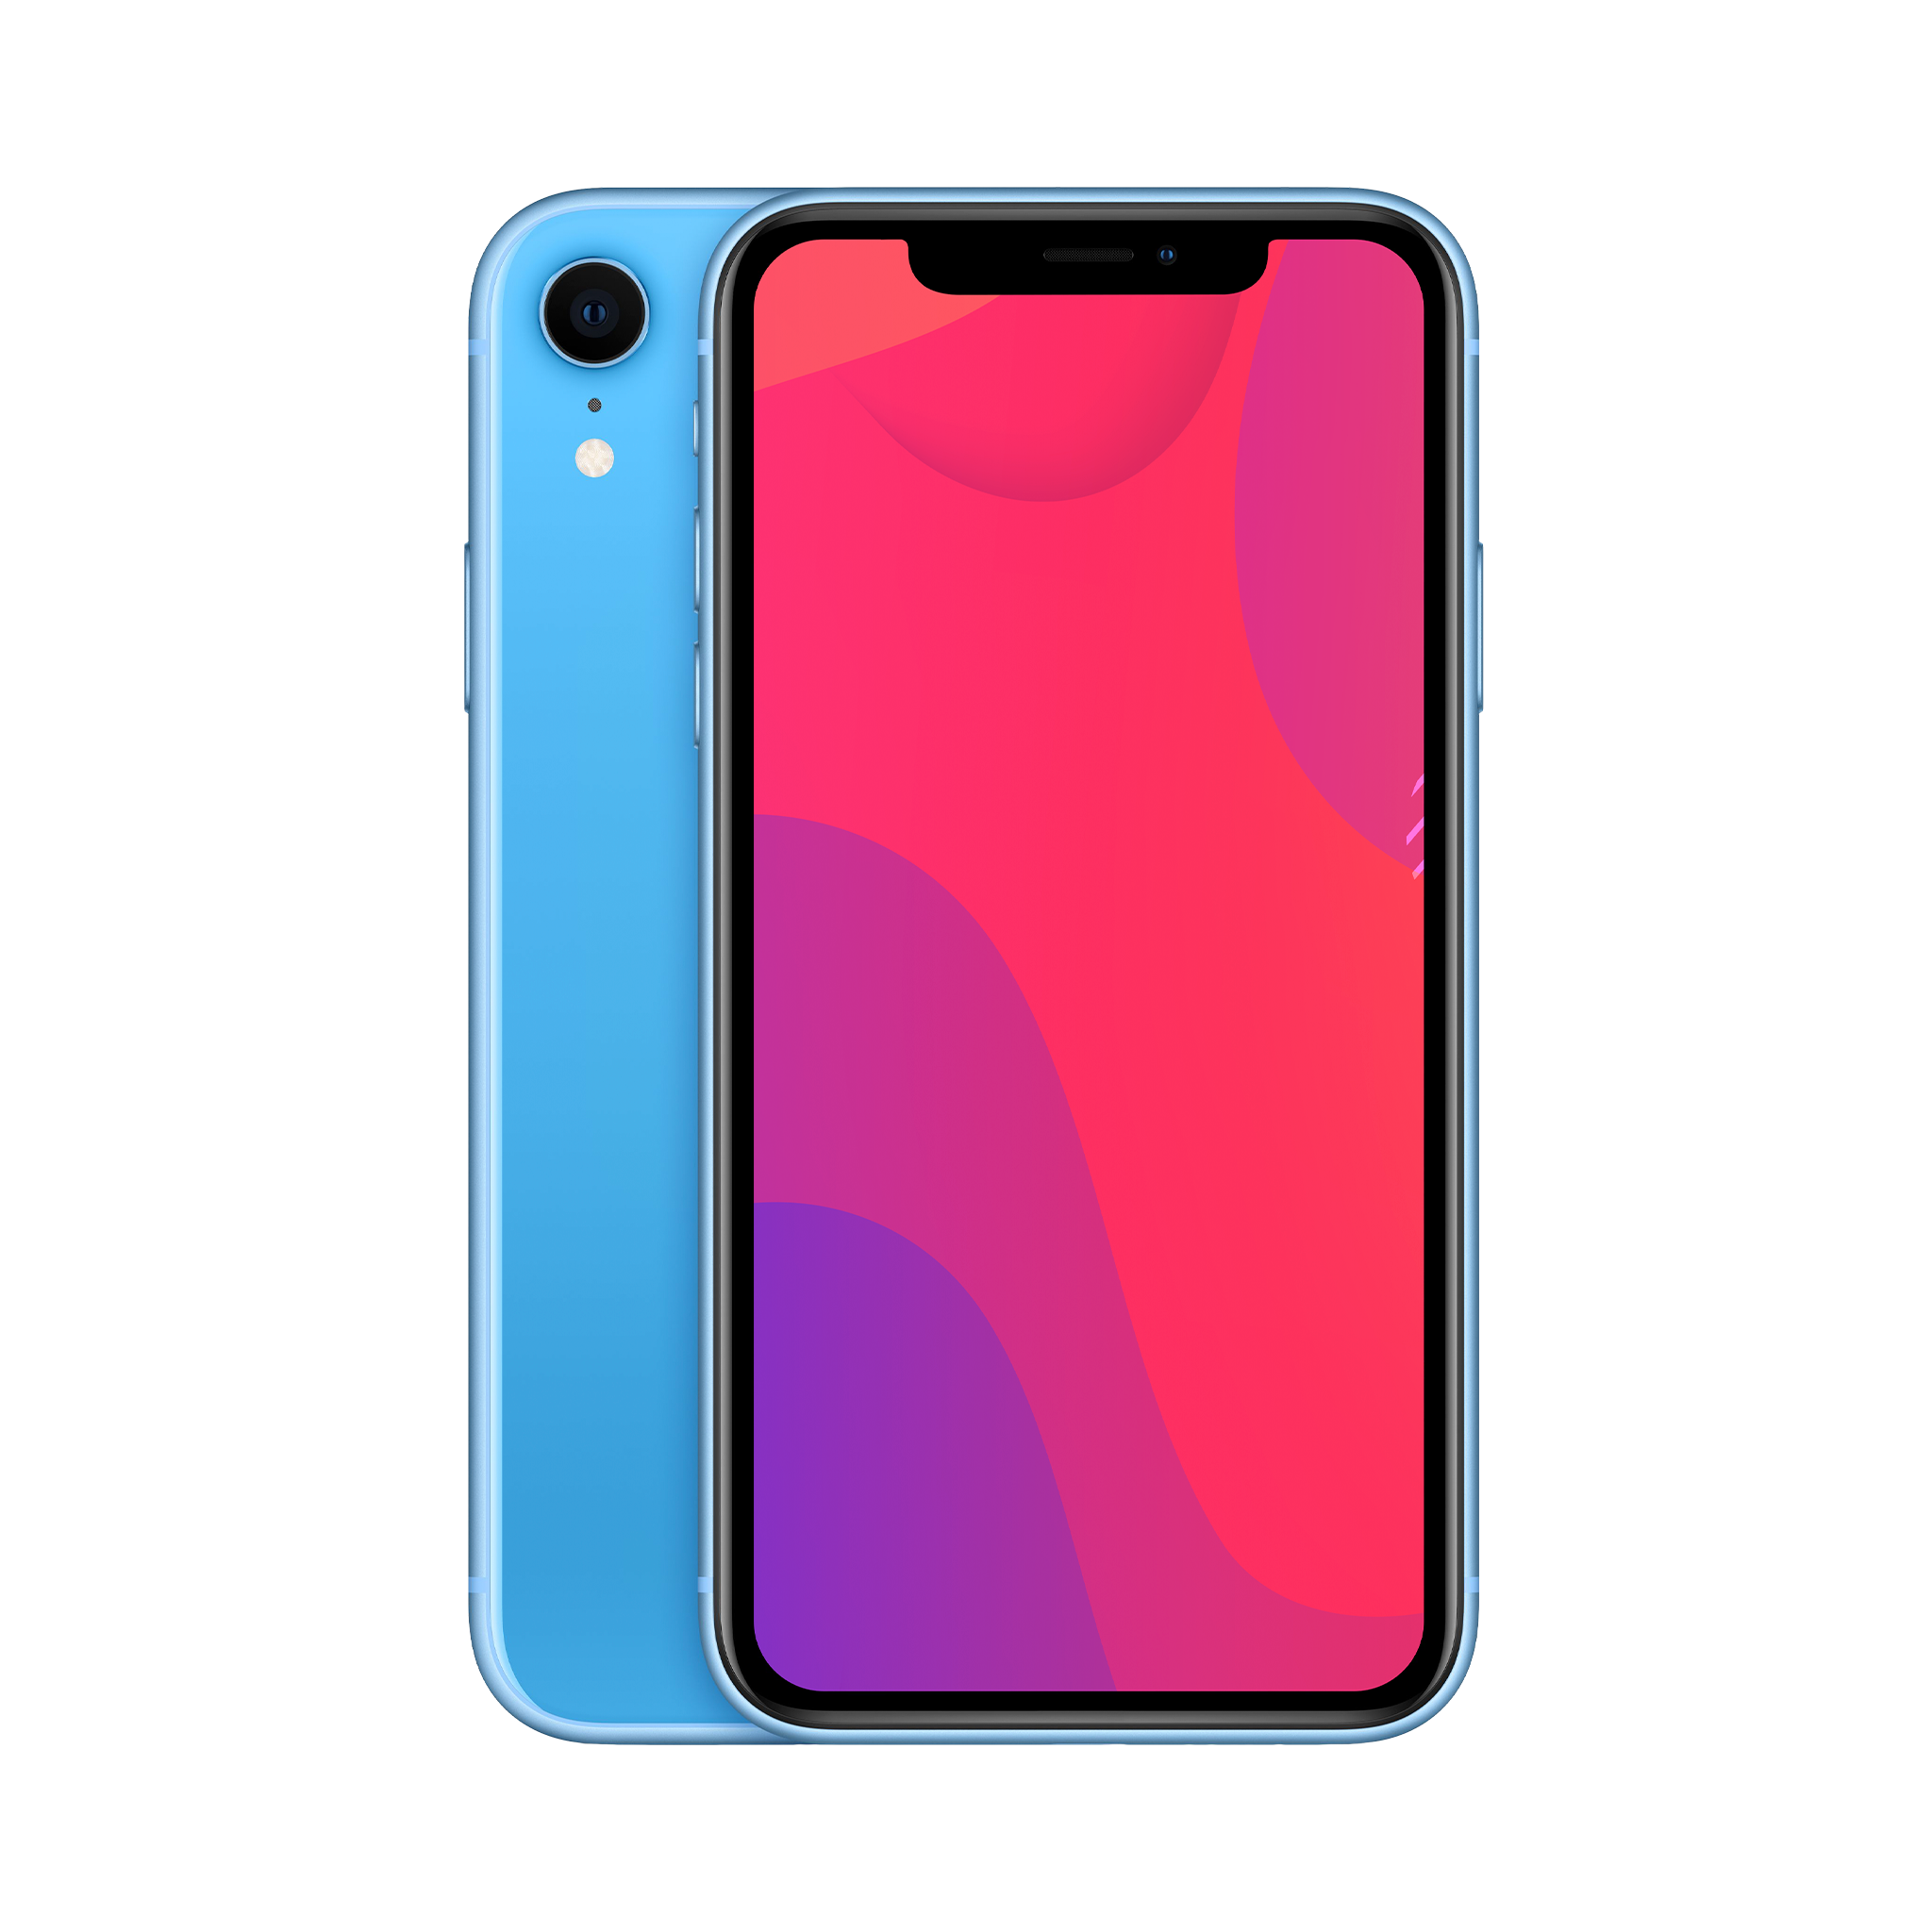 Apple iPhone XR 64GB Blue - weFix | Buy Second Hand Phones, Trade